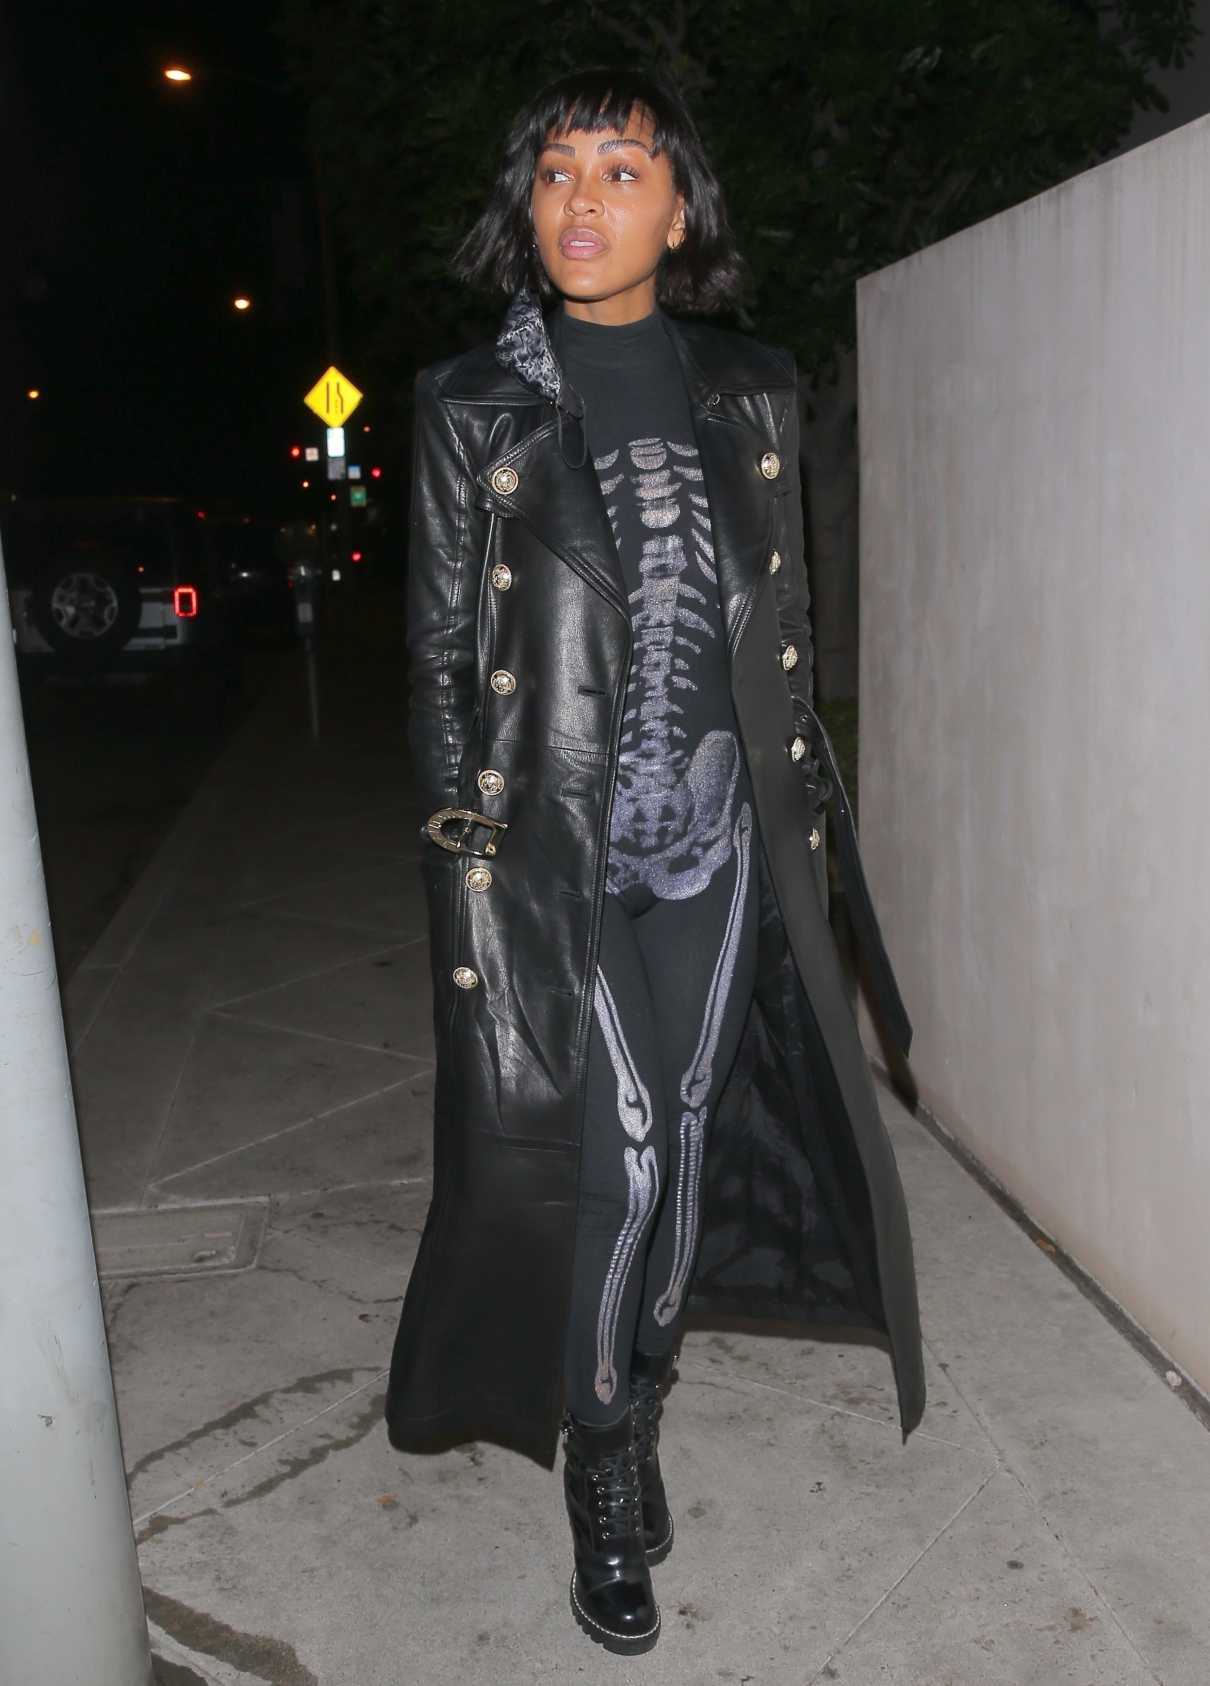 Meagan Good in a Black Leather Coat